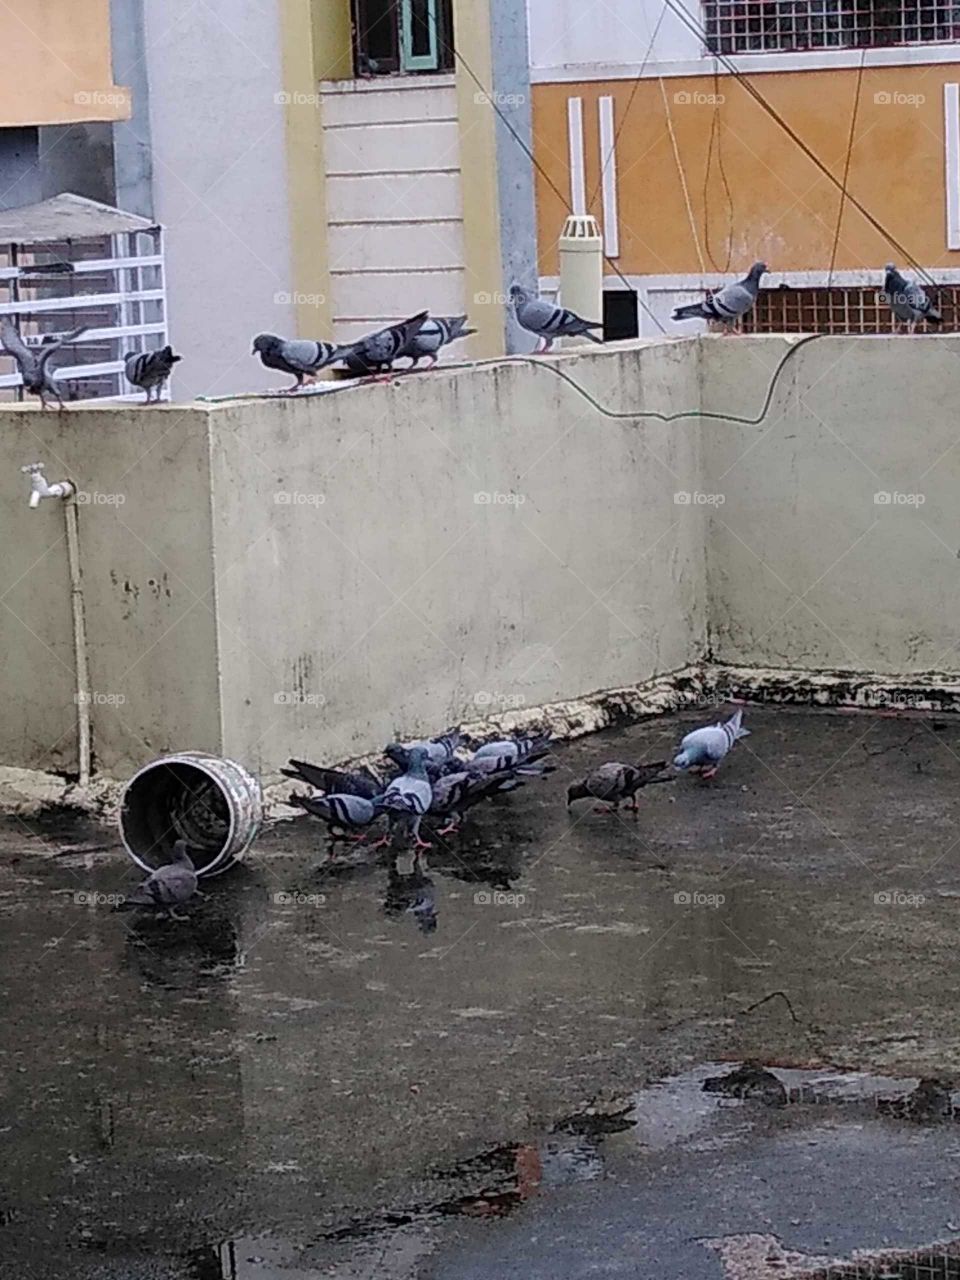 birds eating the left over food